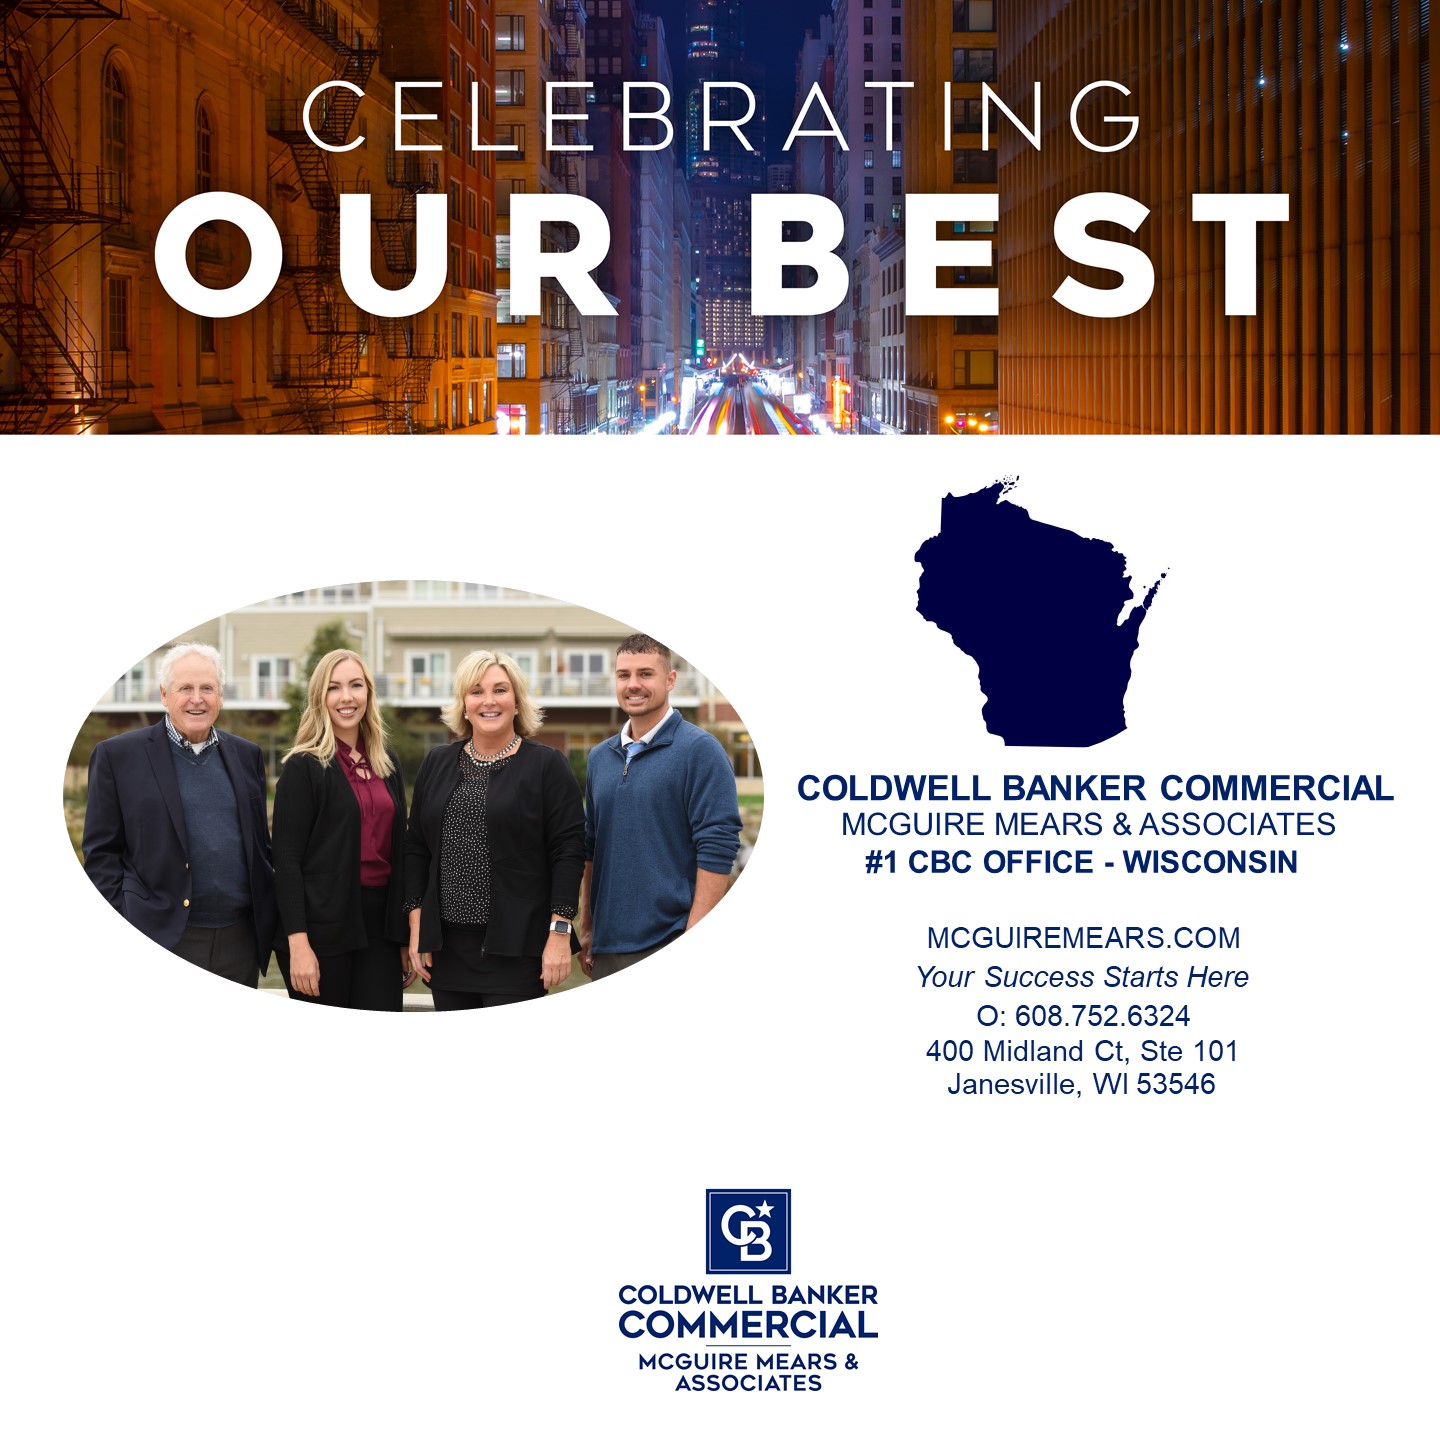 Coldwell Banker Commercial McGuire Mears & Associates Earns No 1 Office Award in Wisconsin